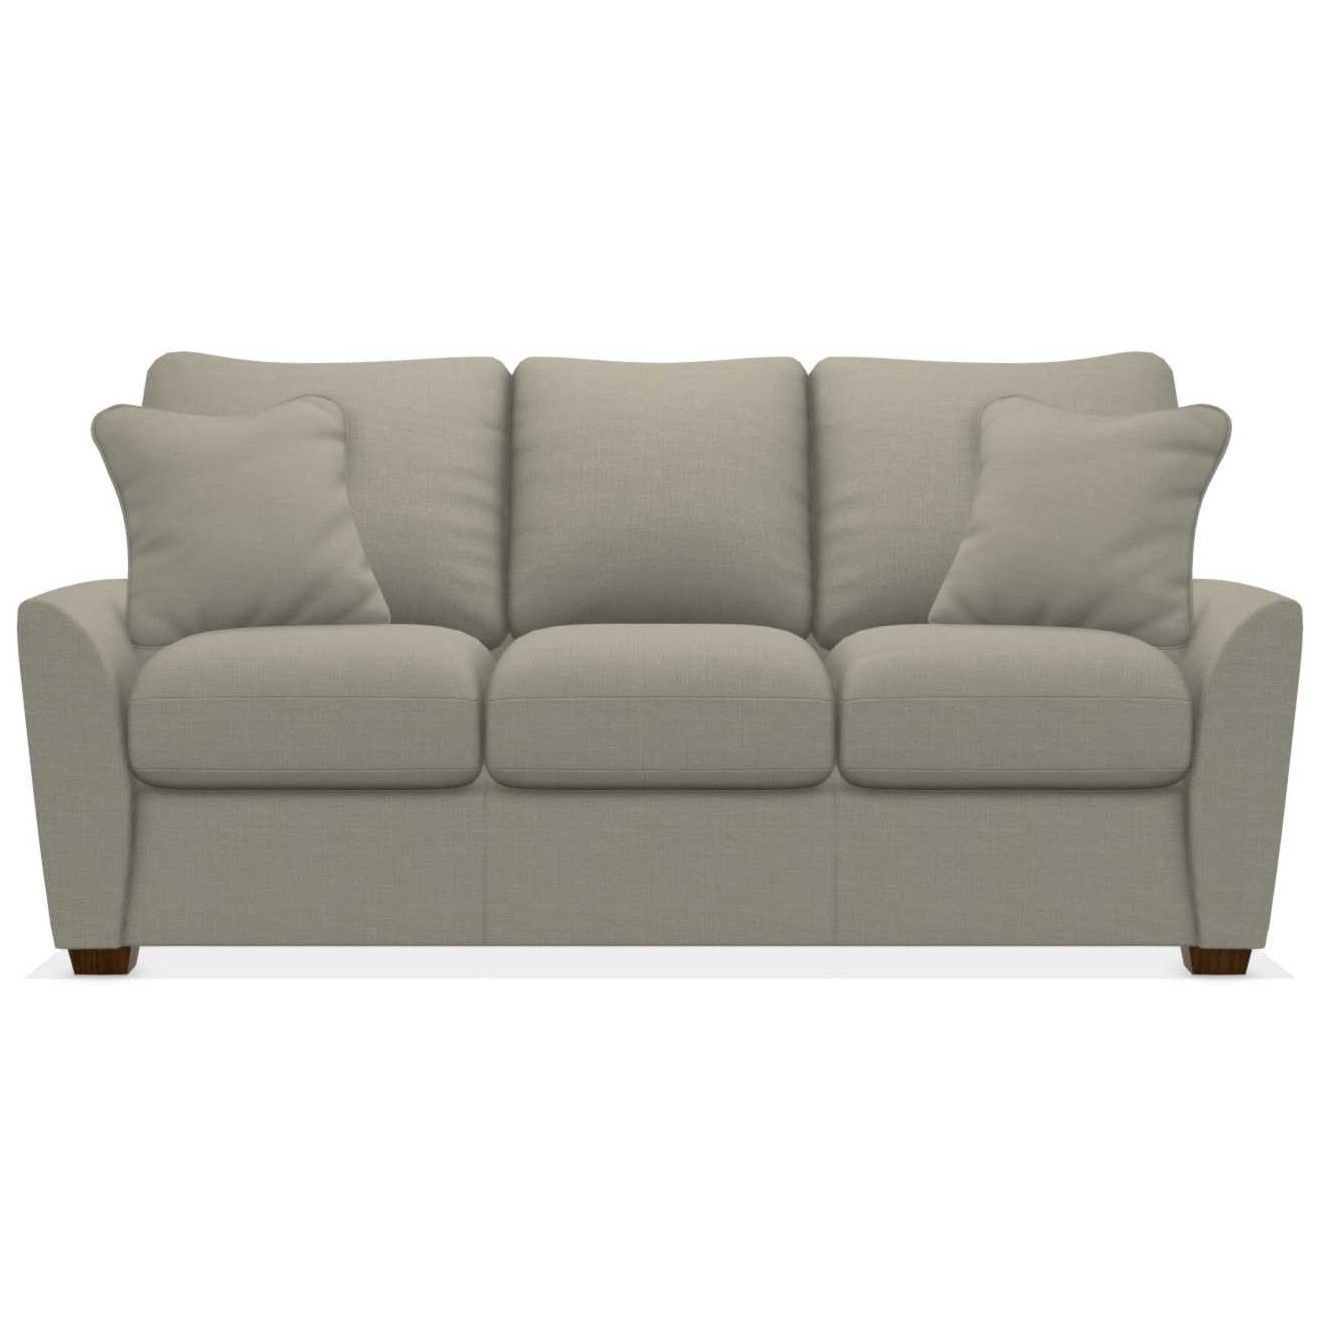 9 Best Sleeper Sofas Of 2021 Most Comfortable Sofa Bed Pullout Couch